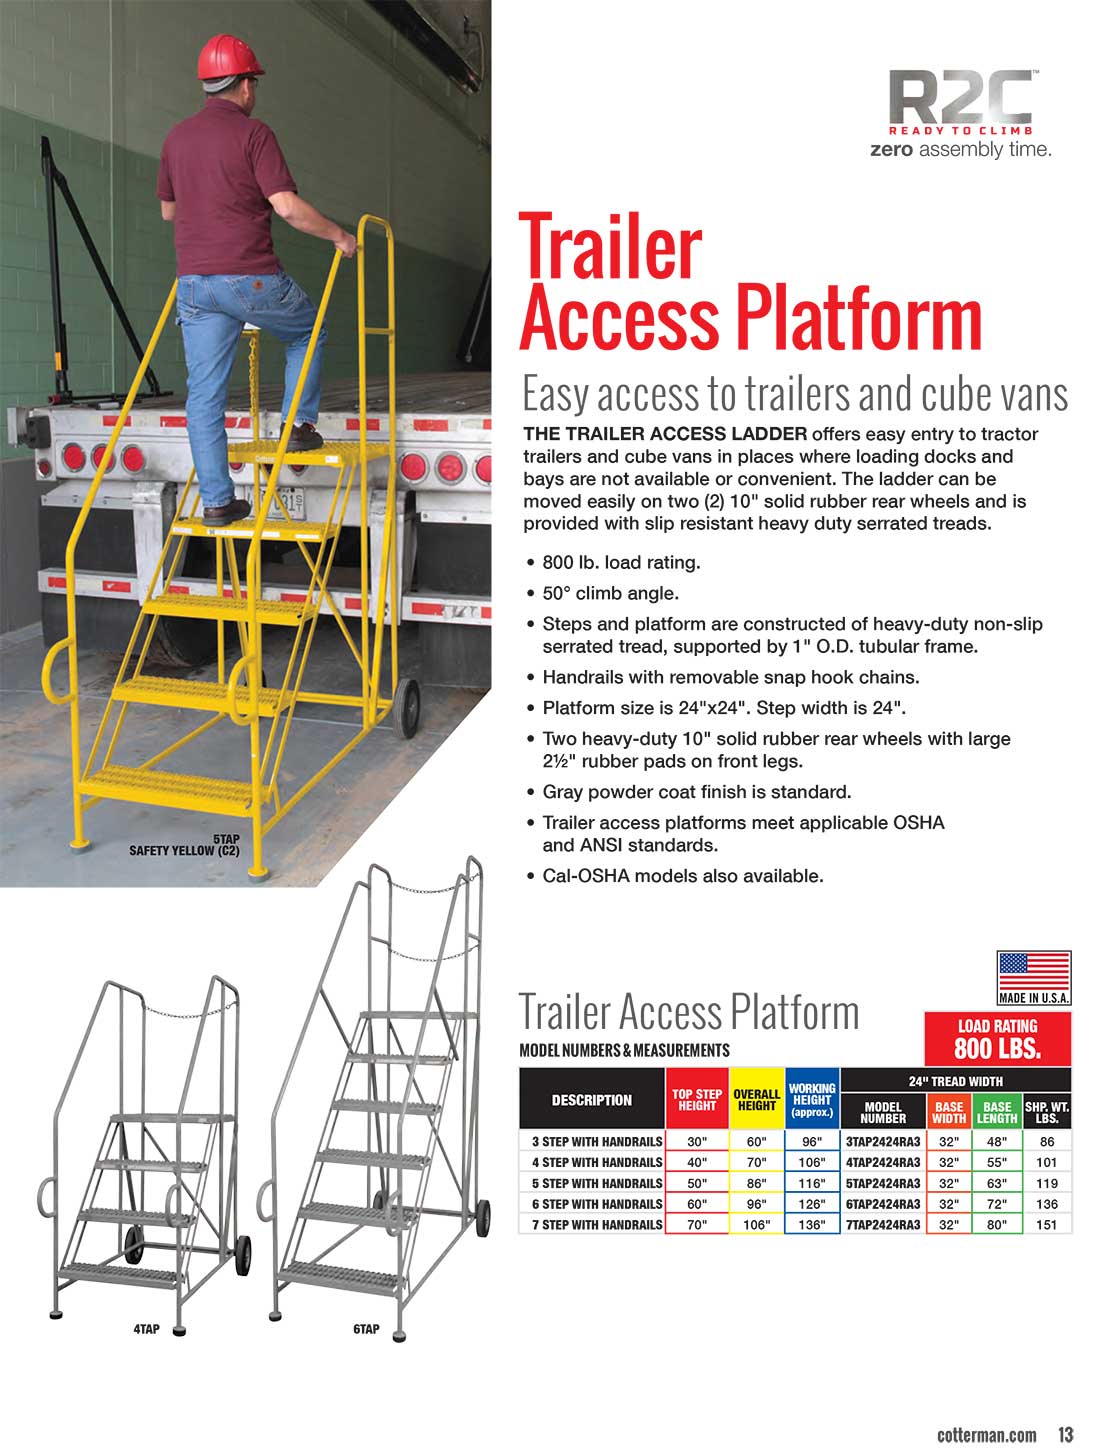 Cotterman Trailer Access Ladders 